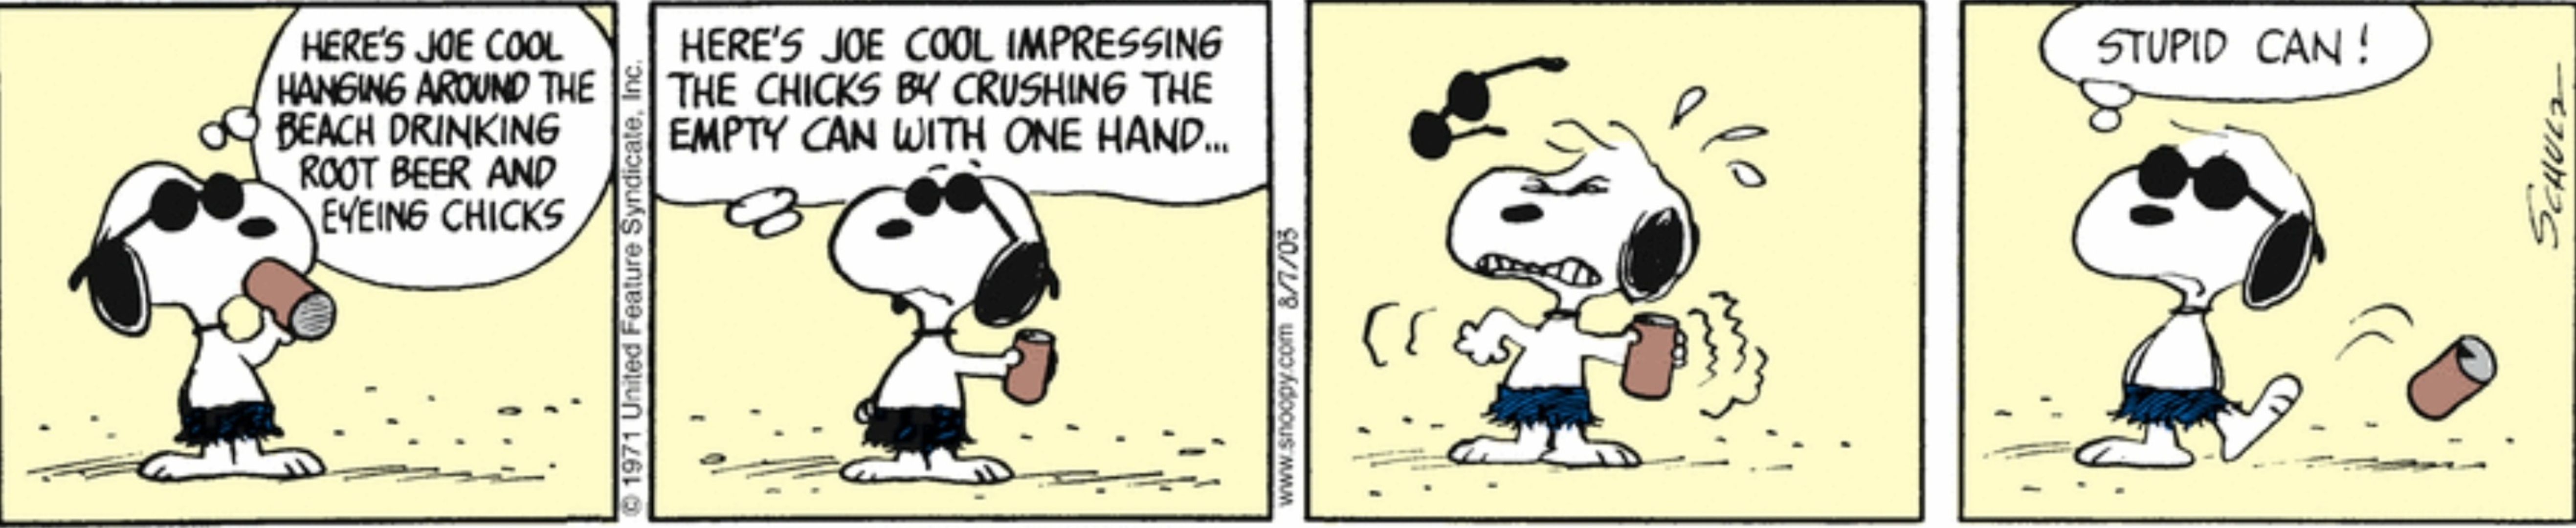 Snoopy as Joe Cool trying to crush a can at the beach.